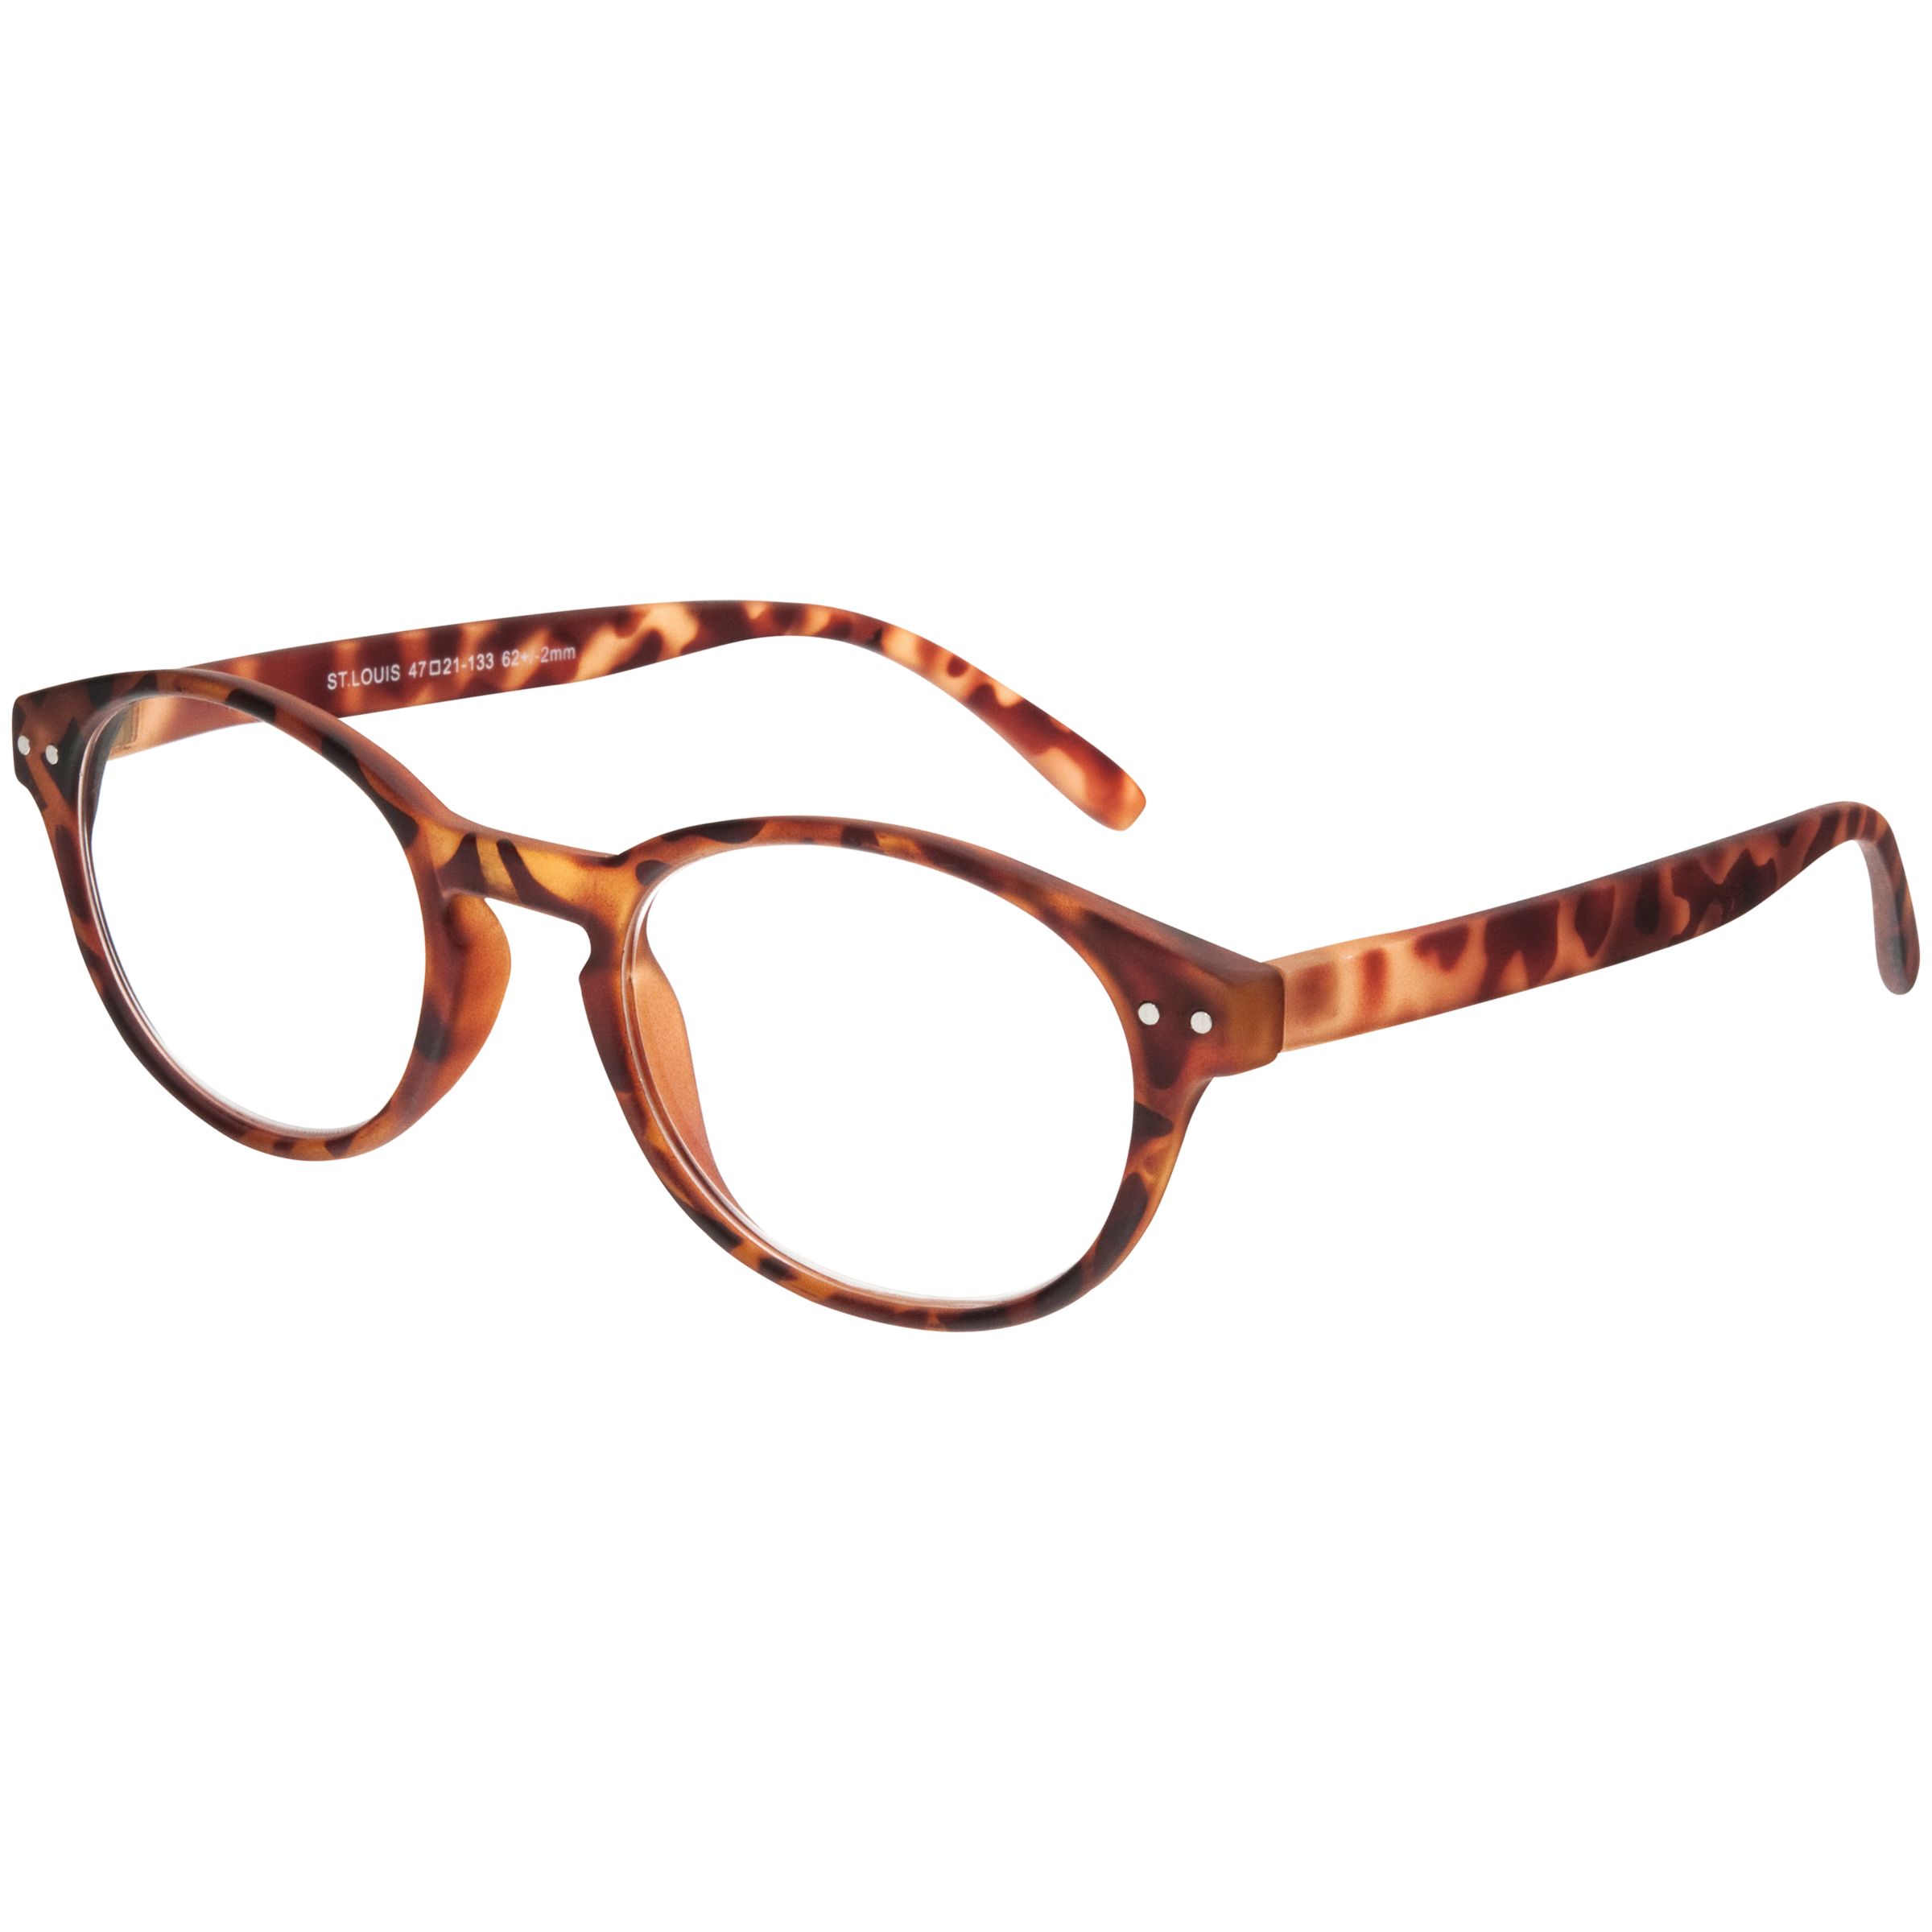 Magnif Eyes Very Narrow Fit Ready Readers St Louis Glasses, Tortoise at